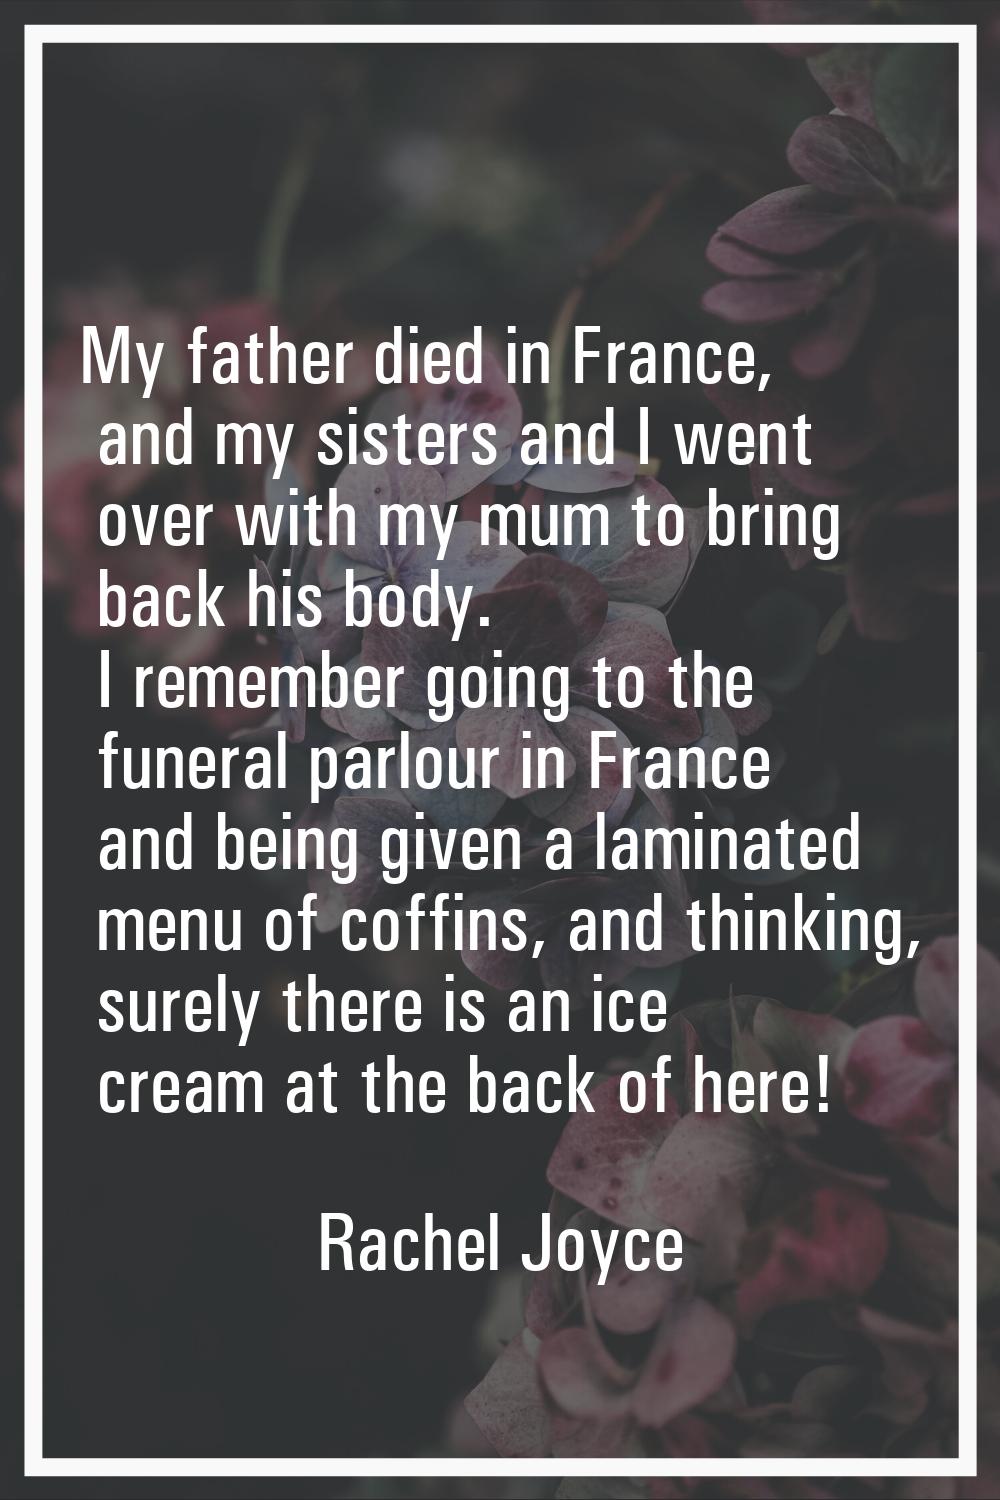 My father died in France, and my sisters and I went over with my mum to bring back his body. I reme